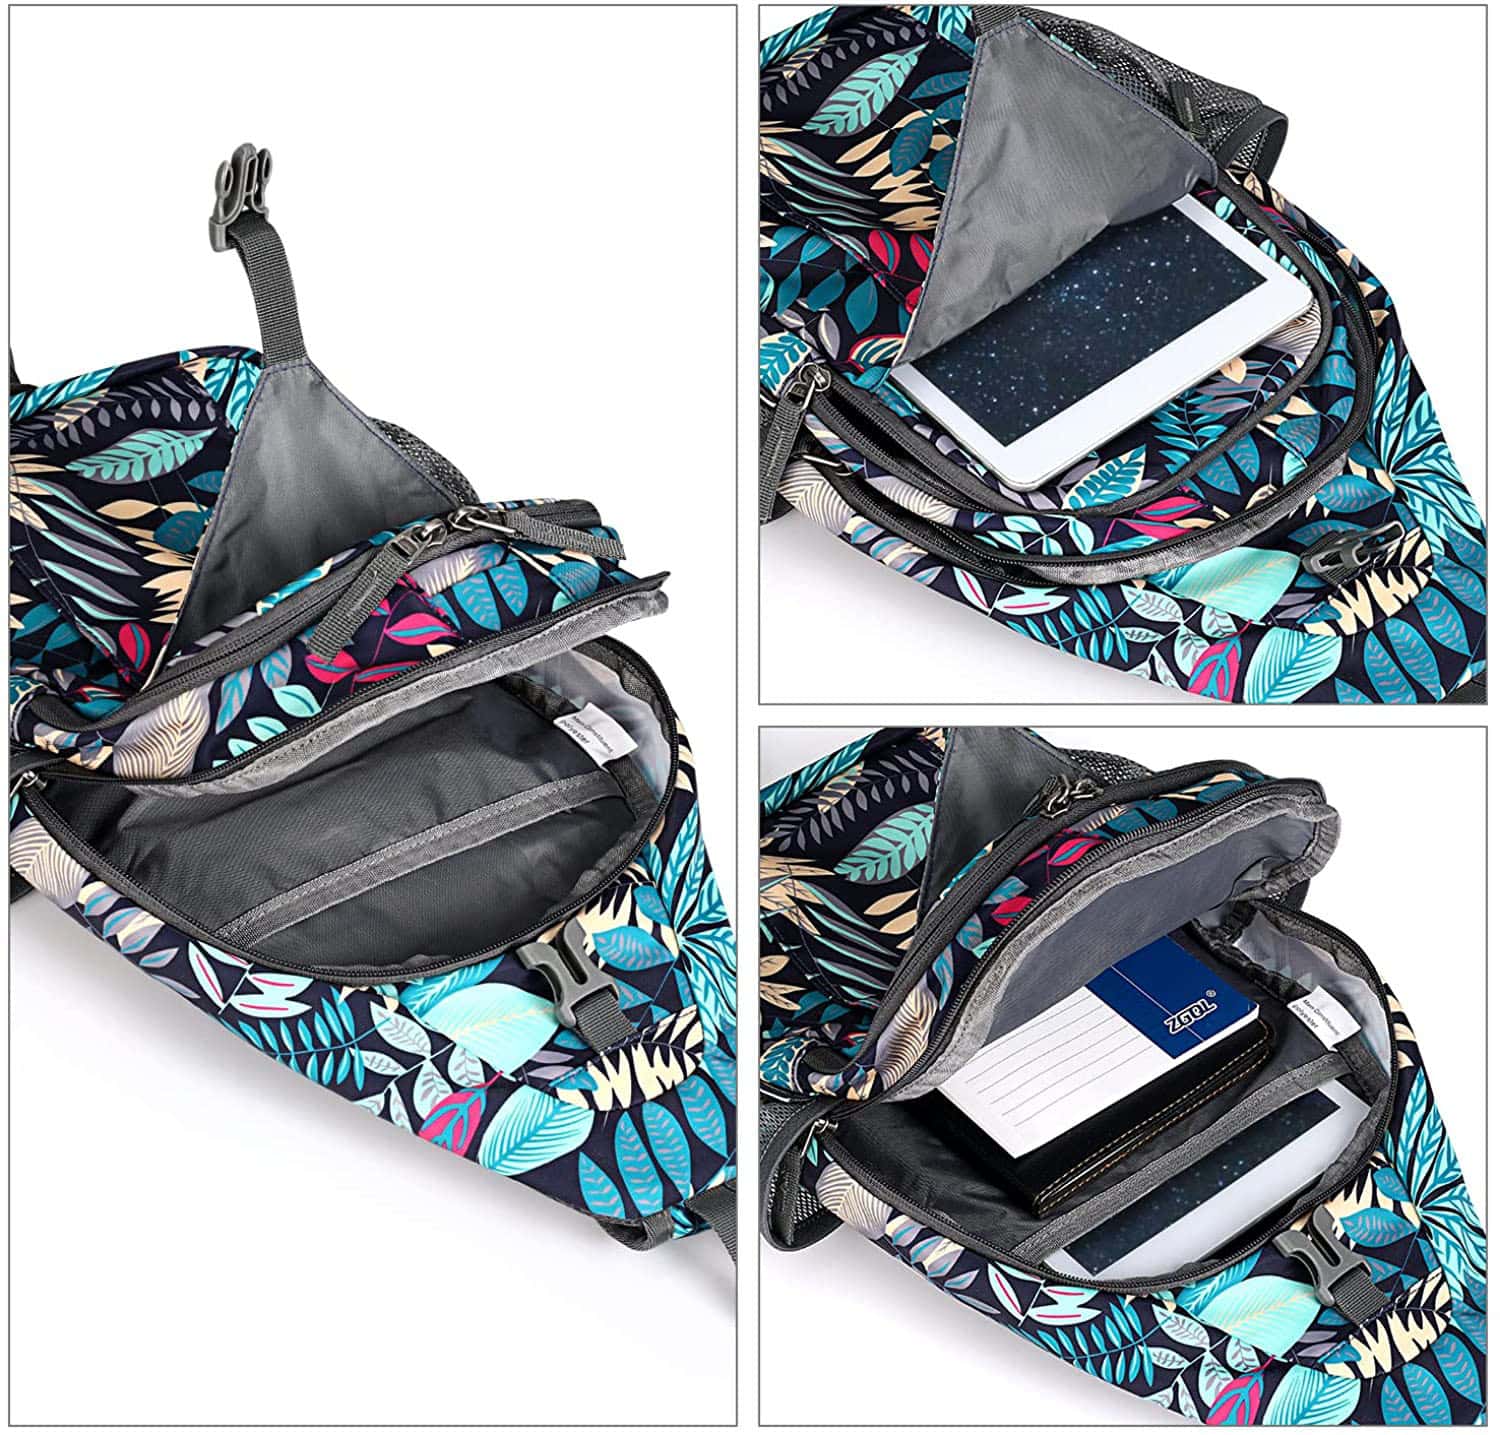 Look for sling bags with in-built organizers or compartments so you can easily carry and find your stuff